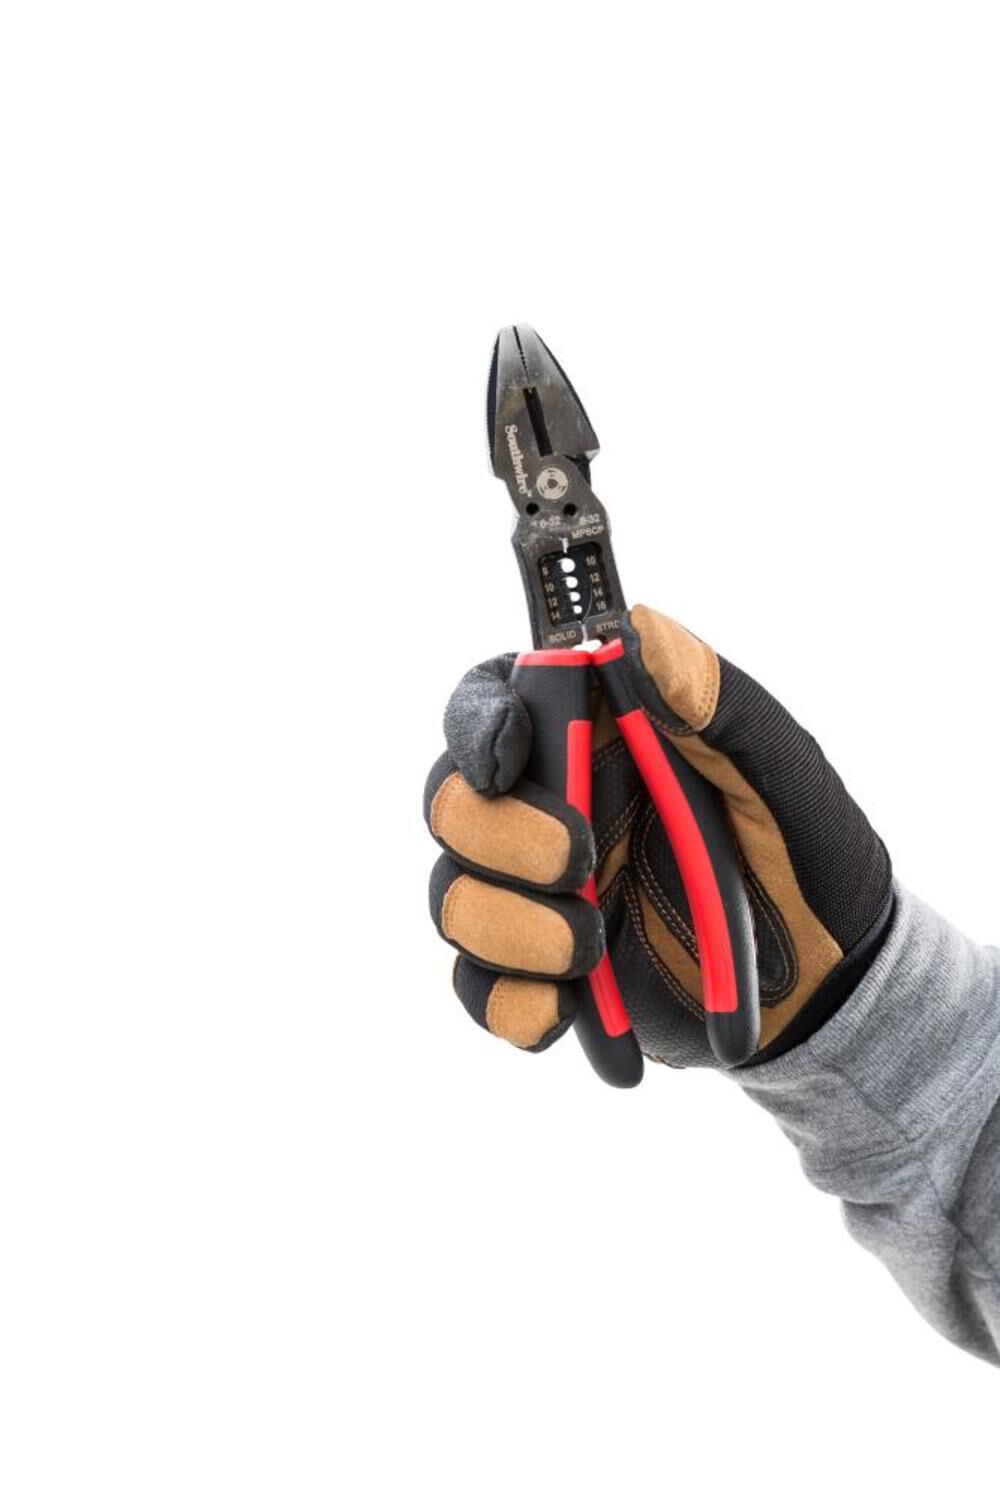 Southwire Tools & Equipment MPSCP 6-in-1 Multi-Tool Side Cutting Plier 